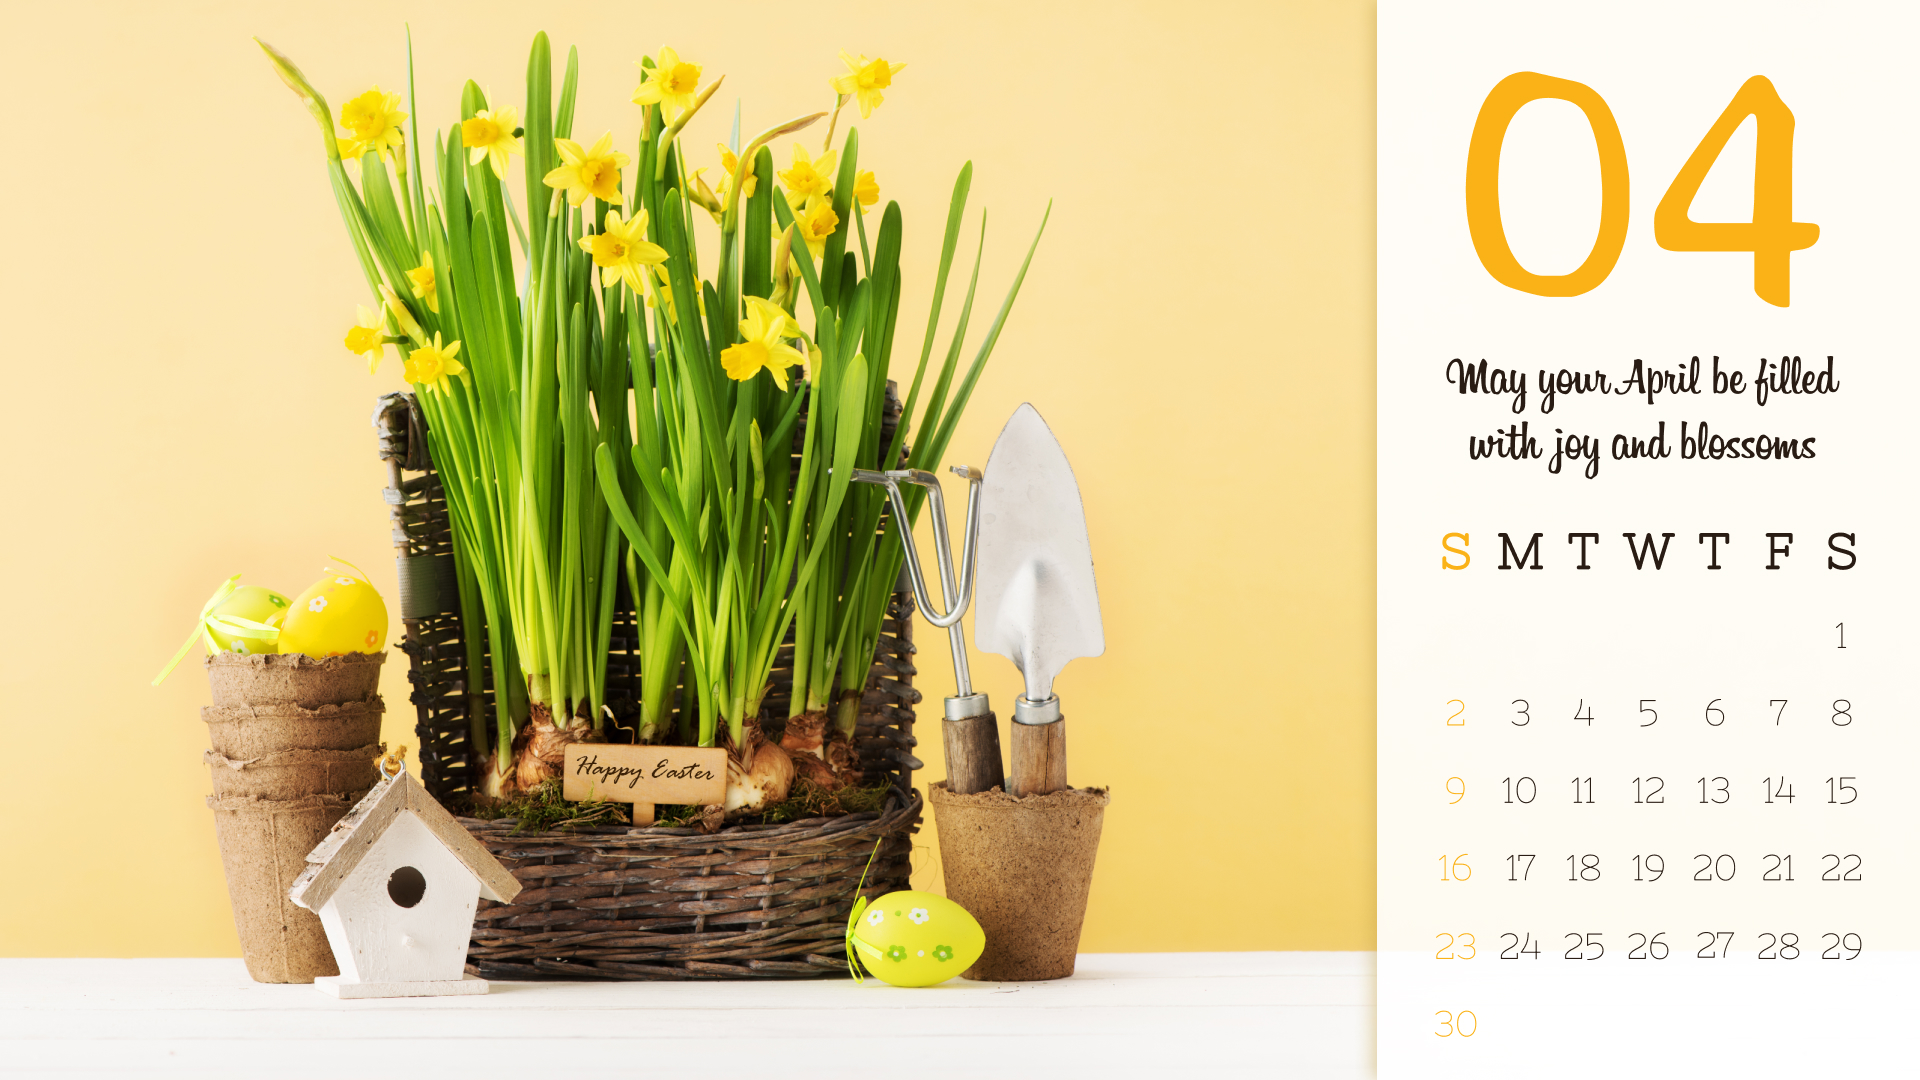 Calendar with a basket of daffodils on a table.